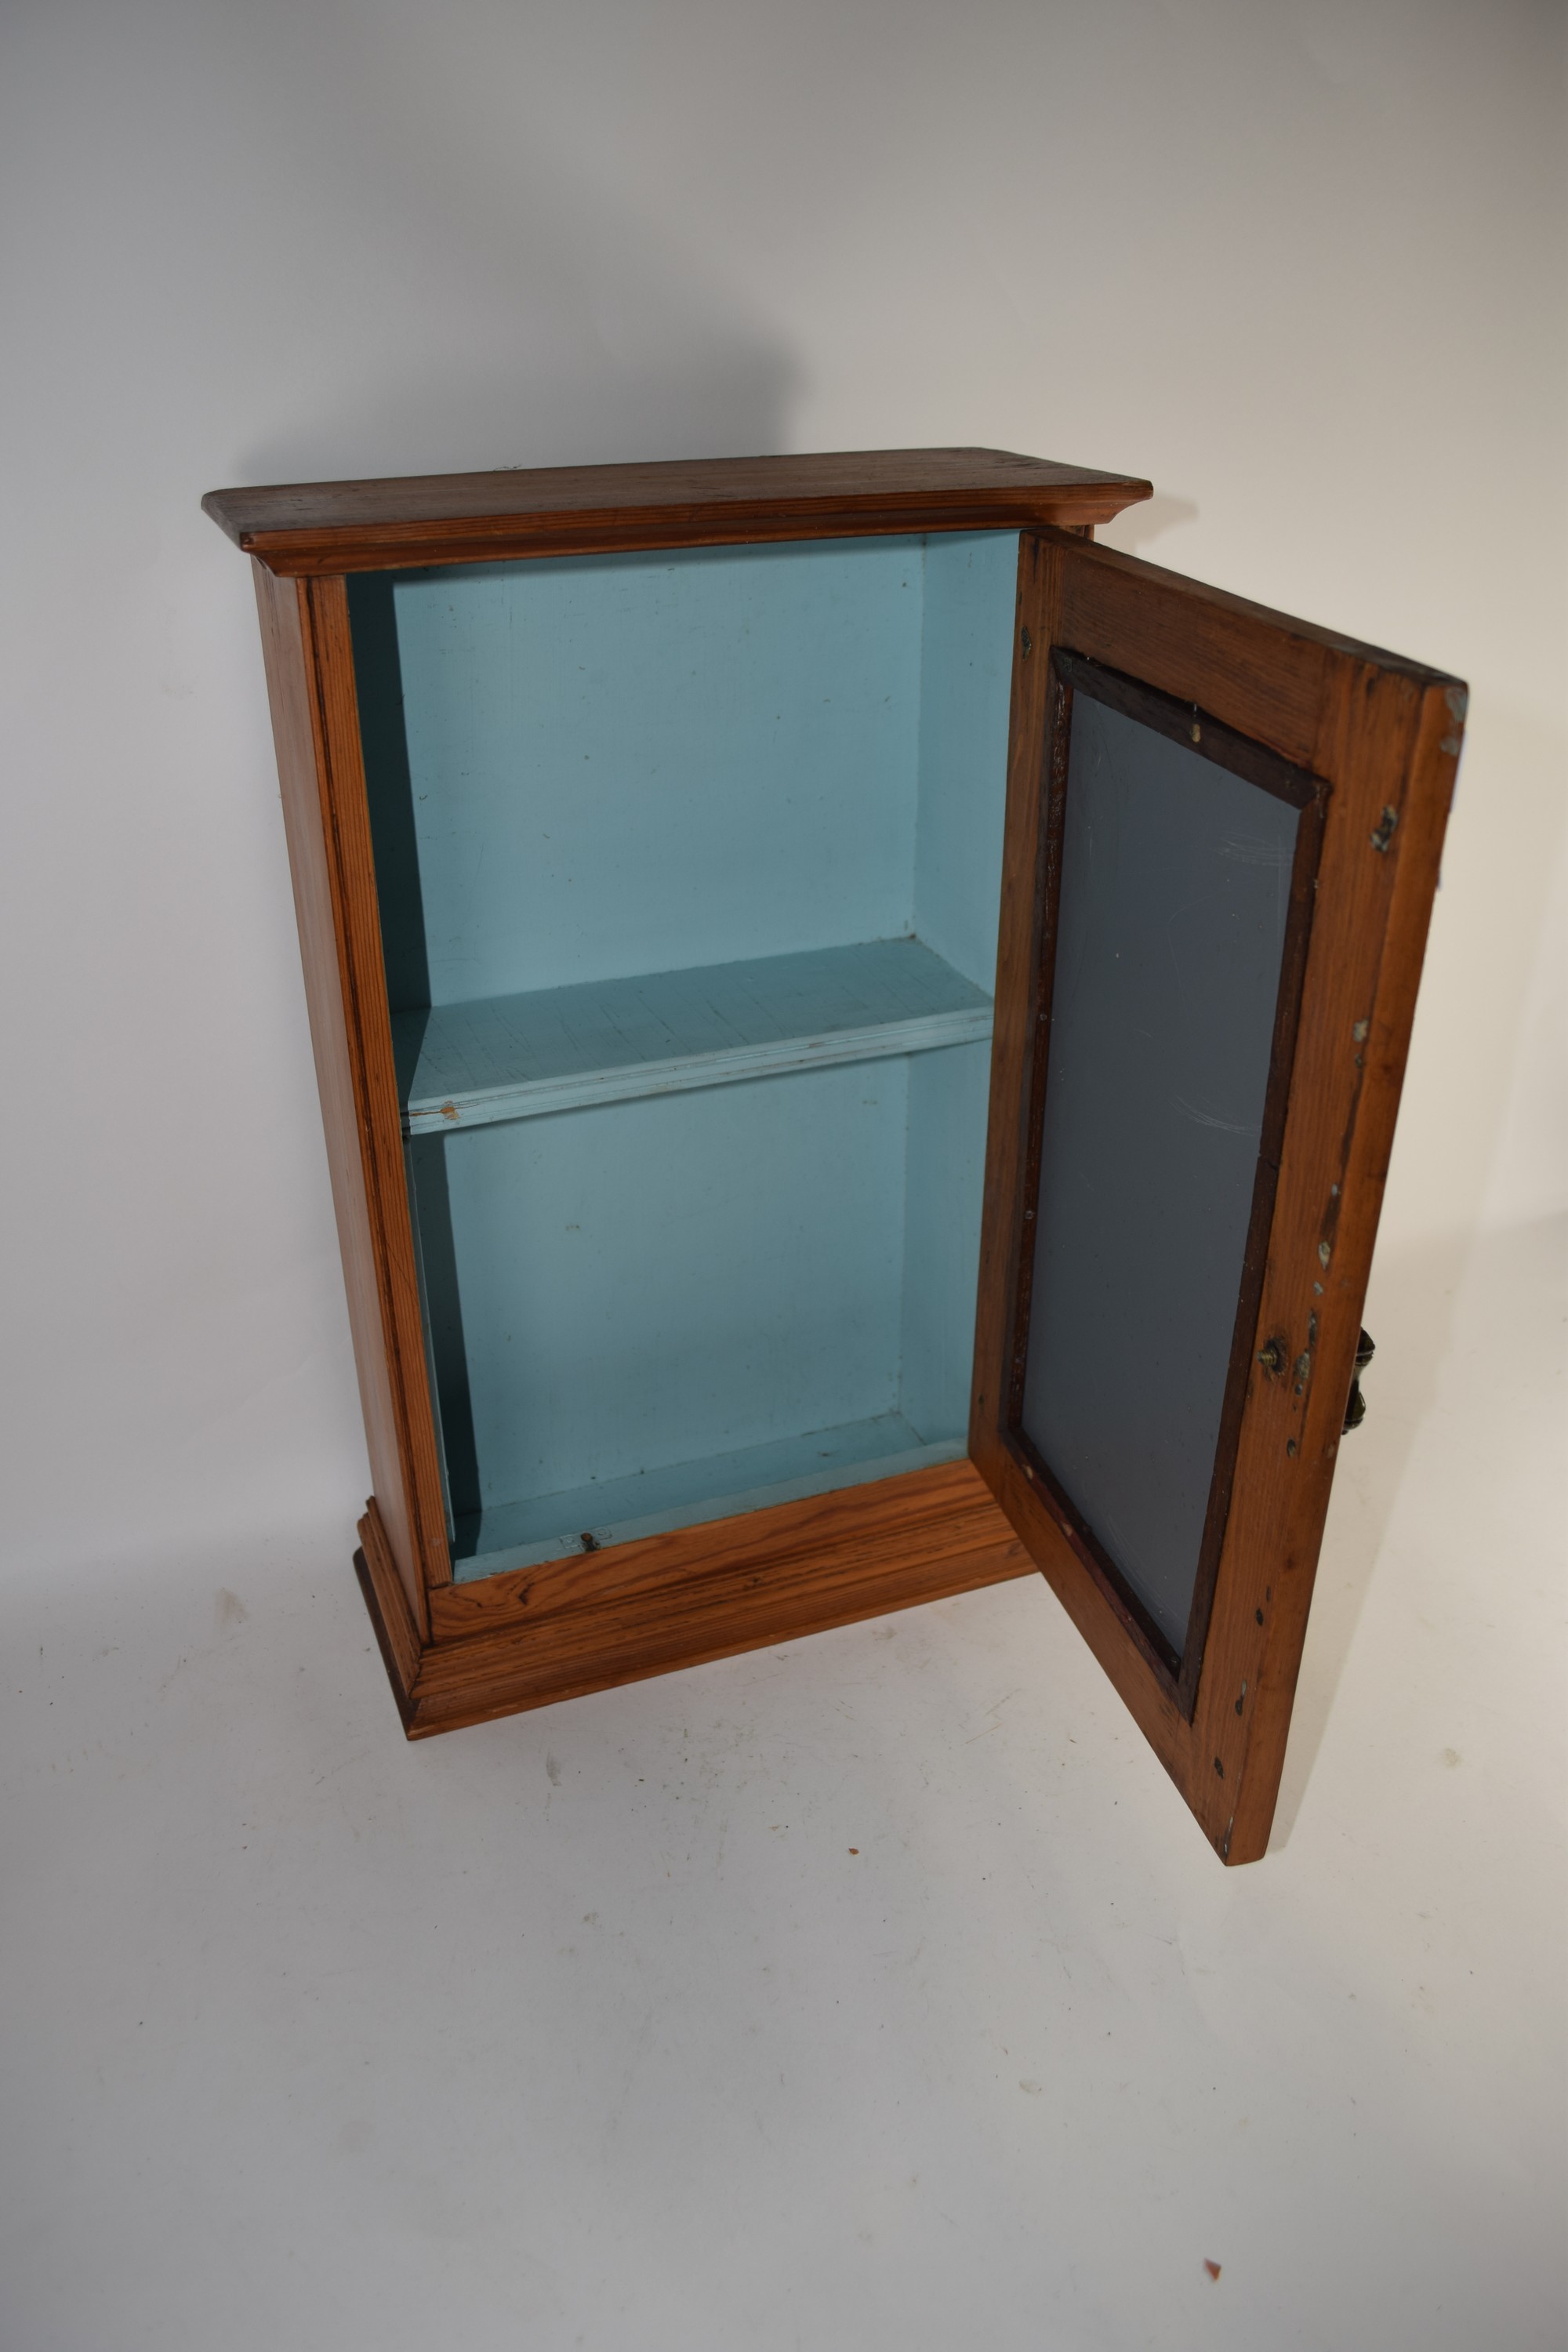 SMALL WOODEN GLAZED CABINET - Image 2 of 2